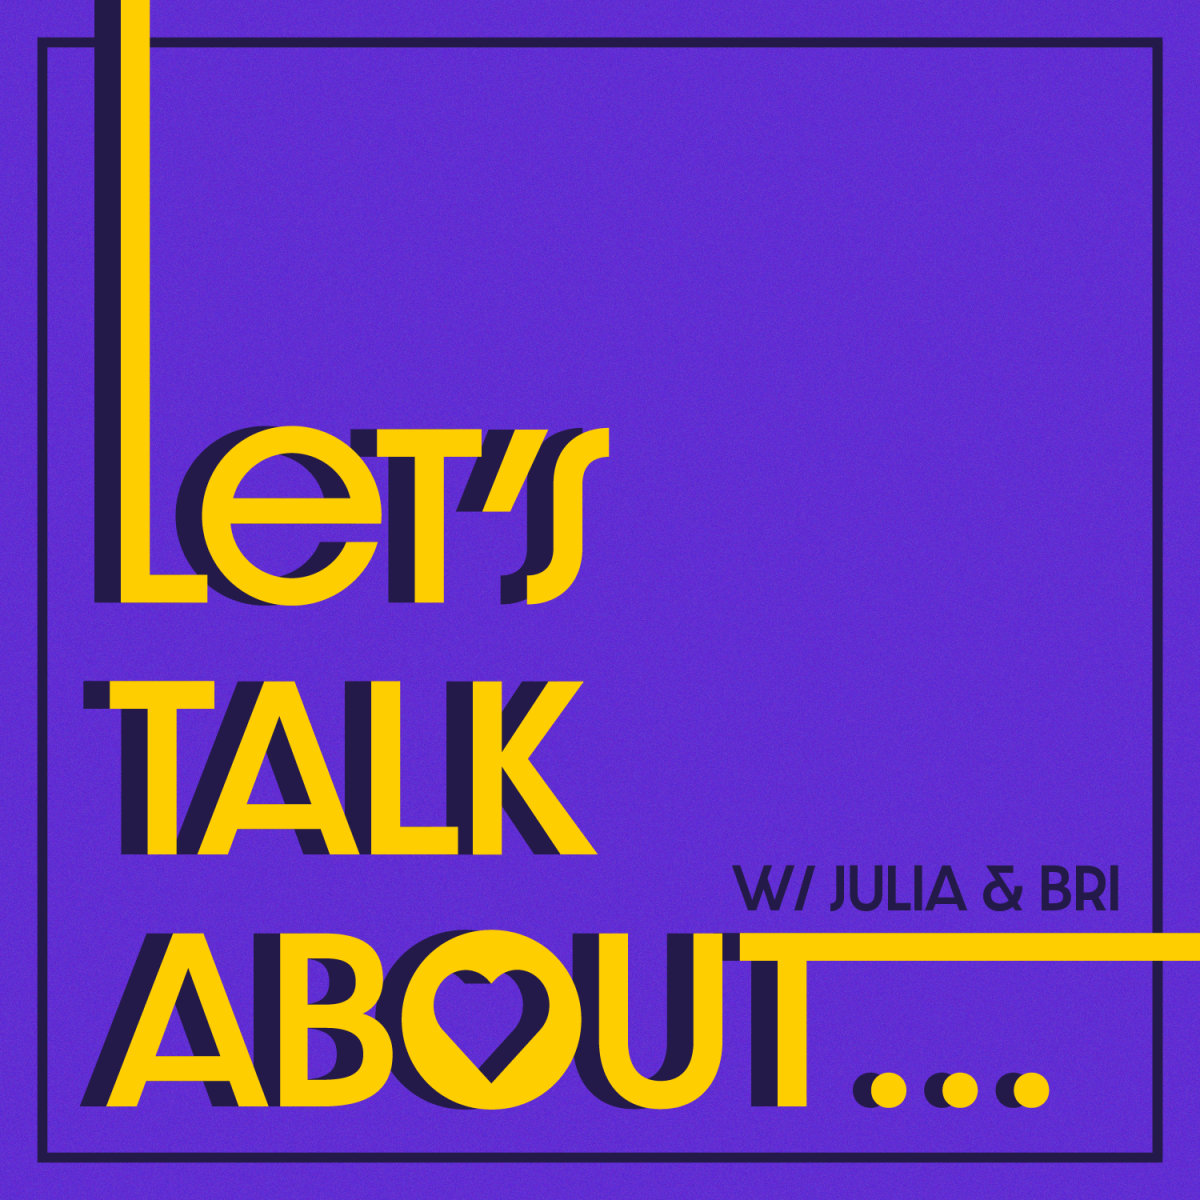 Lets+Talk+About...This+Podcast%21